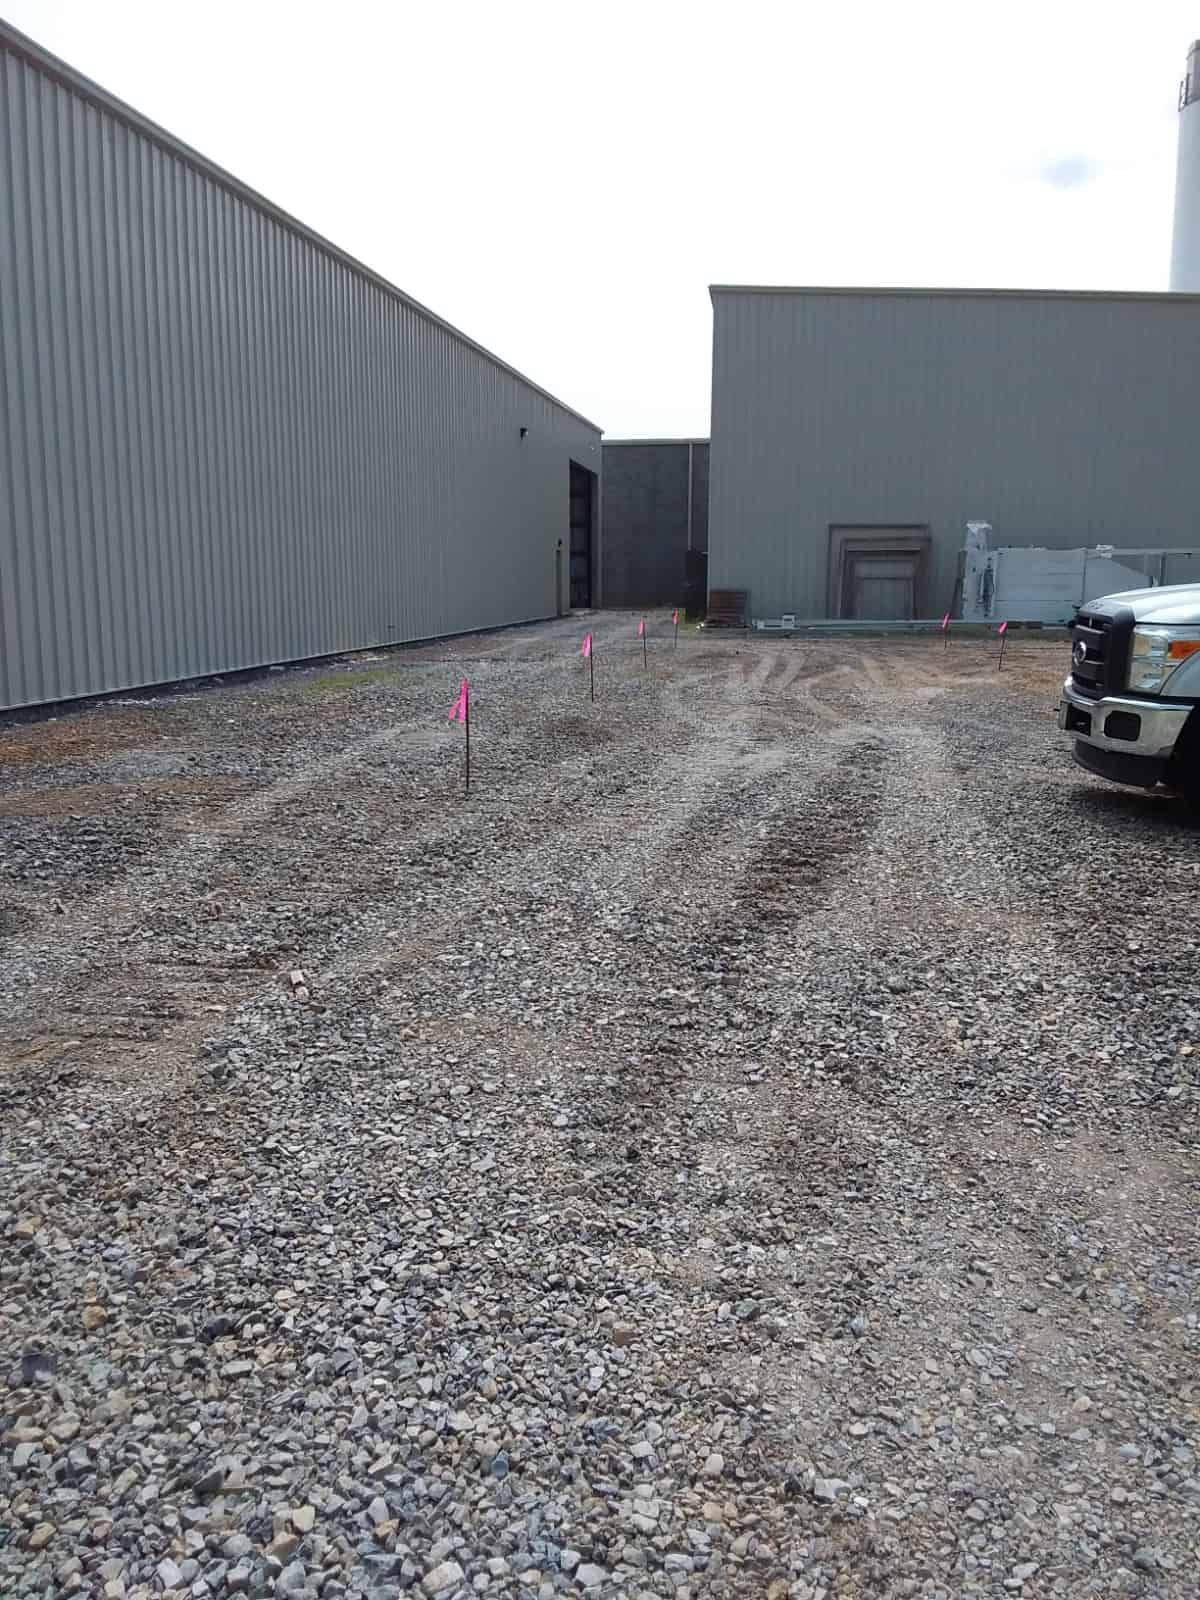 gravel ground leading to building and front of pickup truck